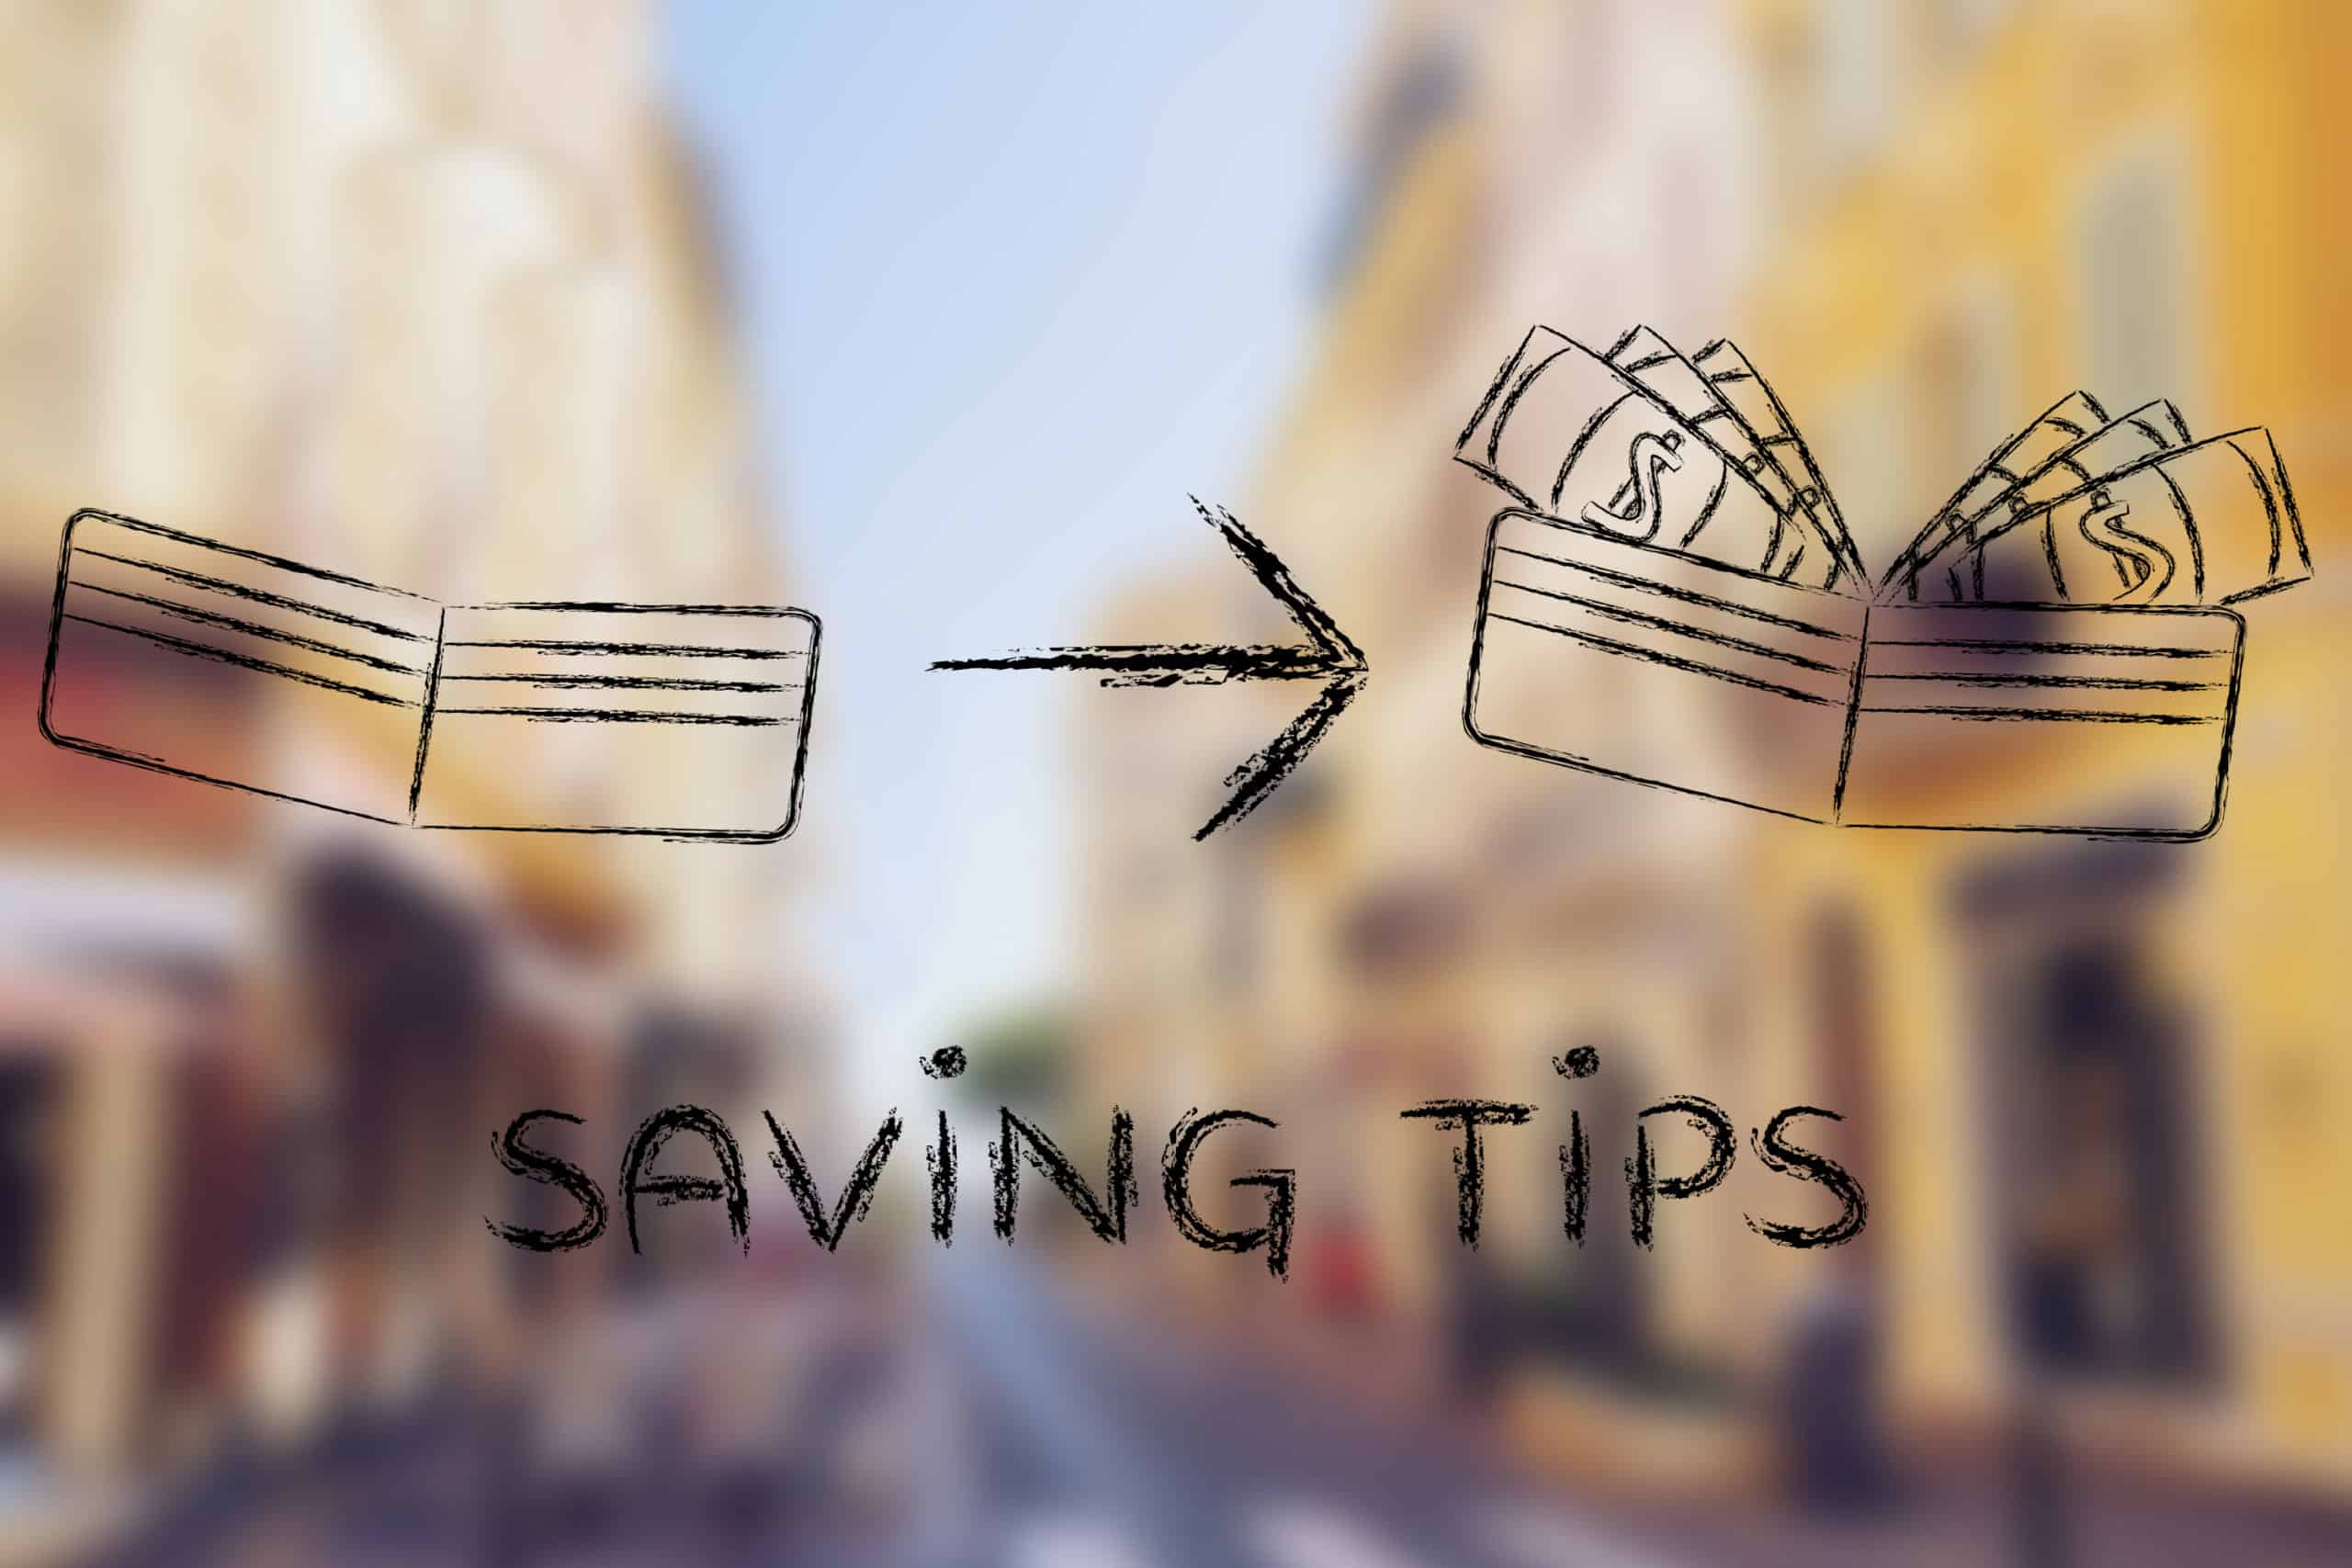 Money-saving tip drawn in marker showing empty wallet going to full of cash.